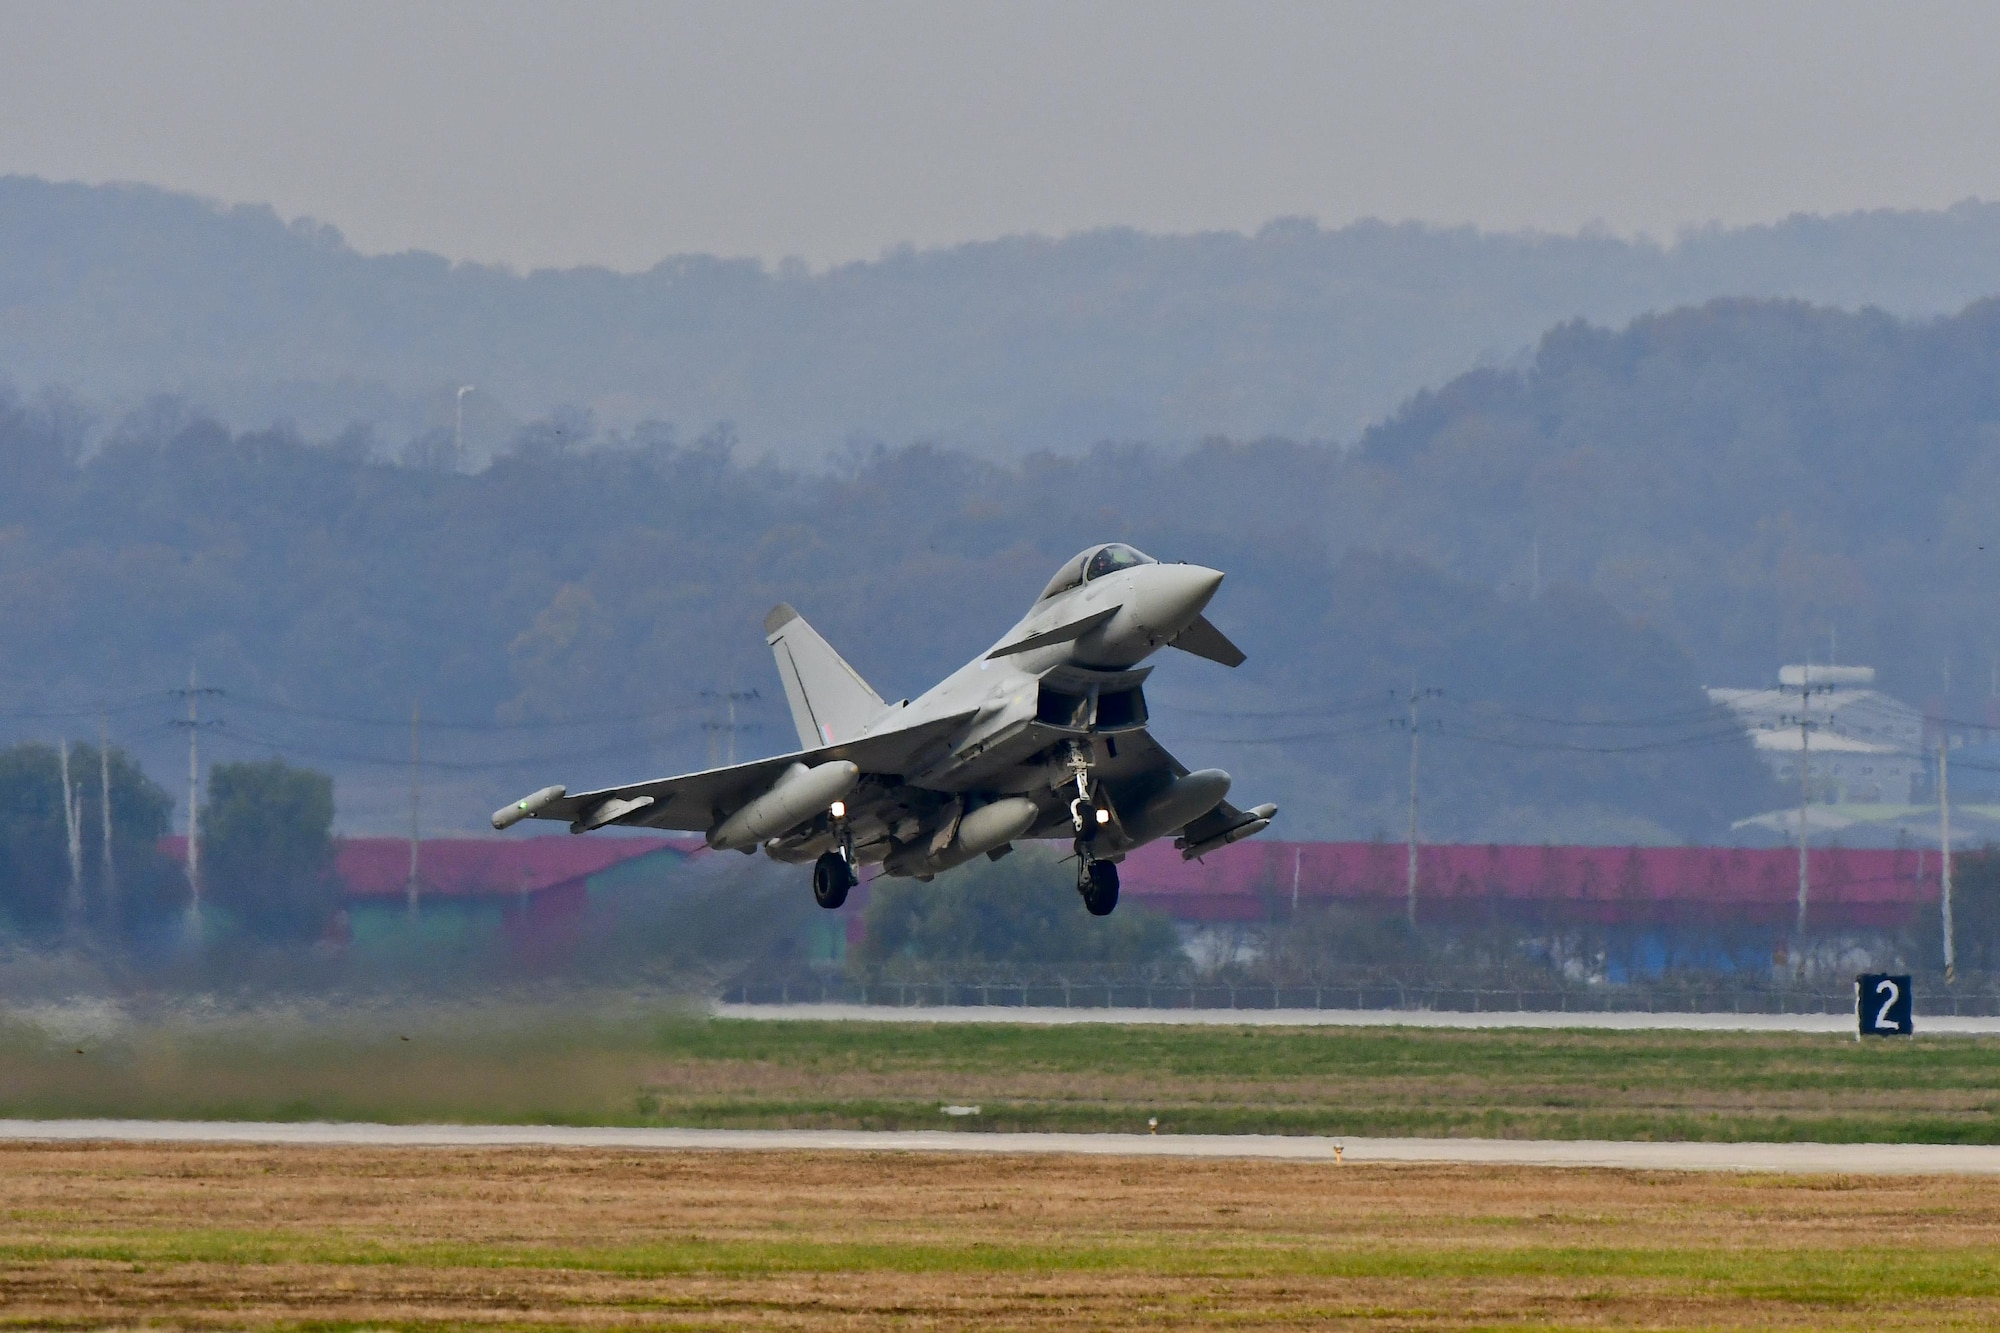 A Royal Air Force Eurofighter Typhoon FRG4 takes off at Osan Air Base, Republic of Korea, Nov. 7, 2016. The RAF deployed the largest number of assets on the Korean Peninsula since the Korean War during Invincible Shield, an interoperability exchange, from Nov. 1 – 10. (U.S. Air Force photo by Senior Airman Victor J. Caputo)